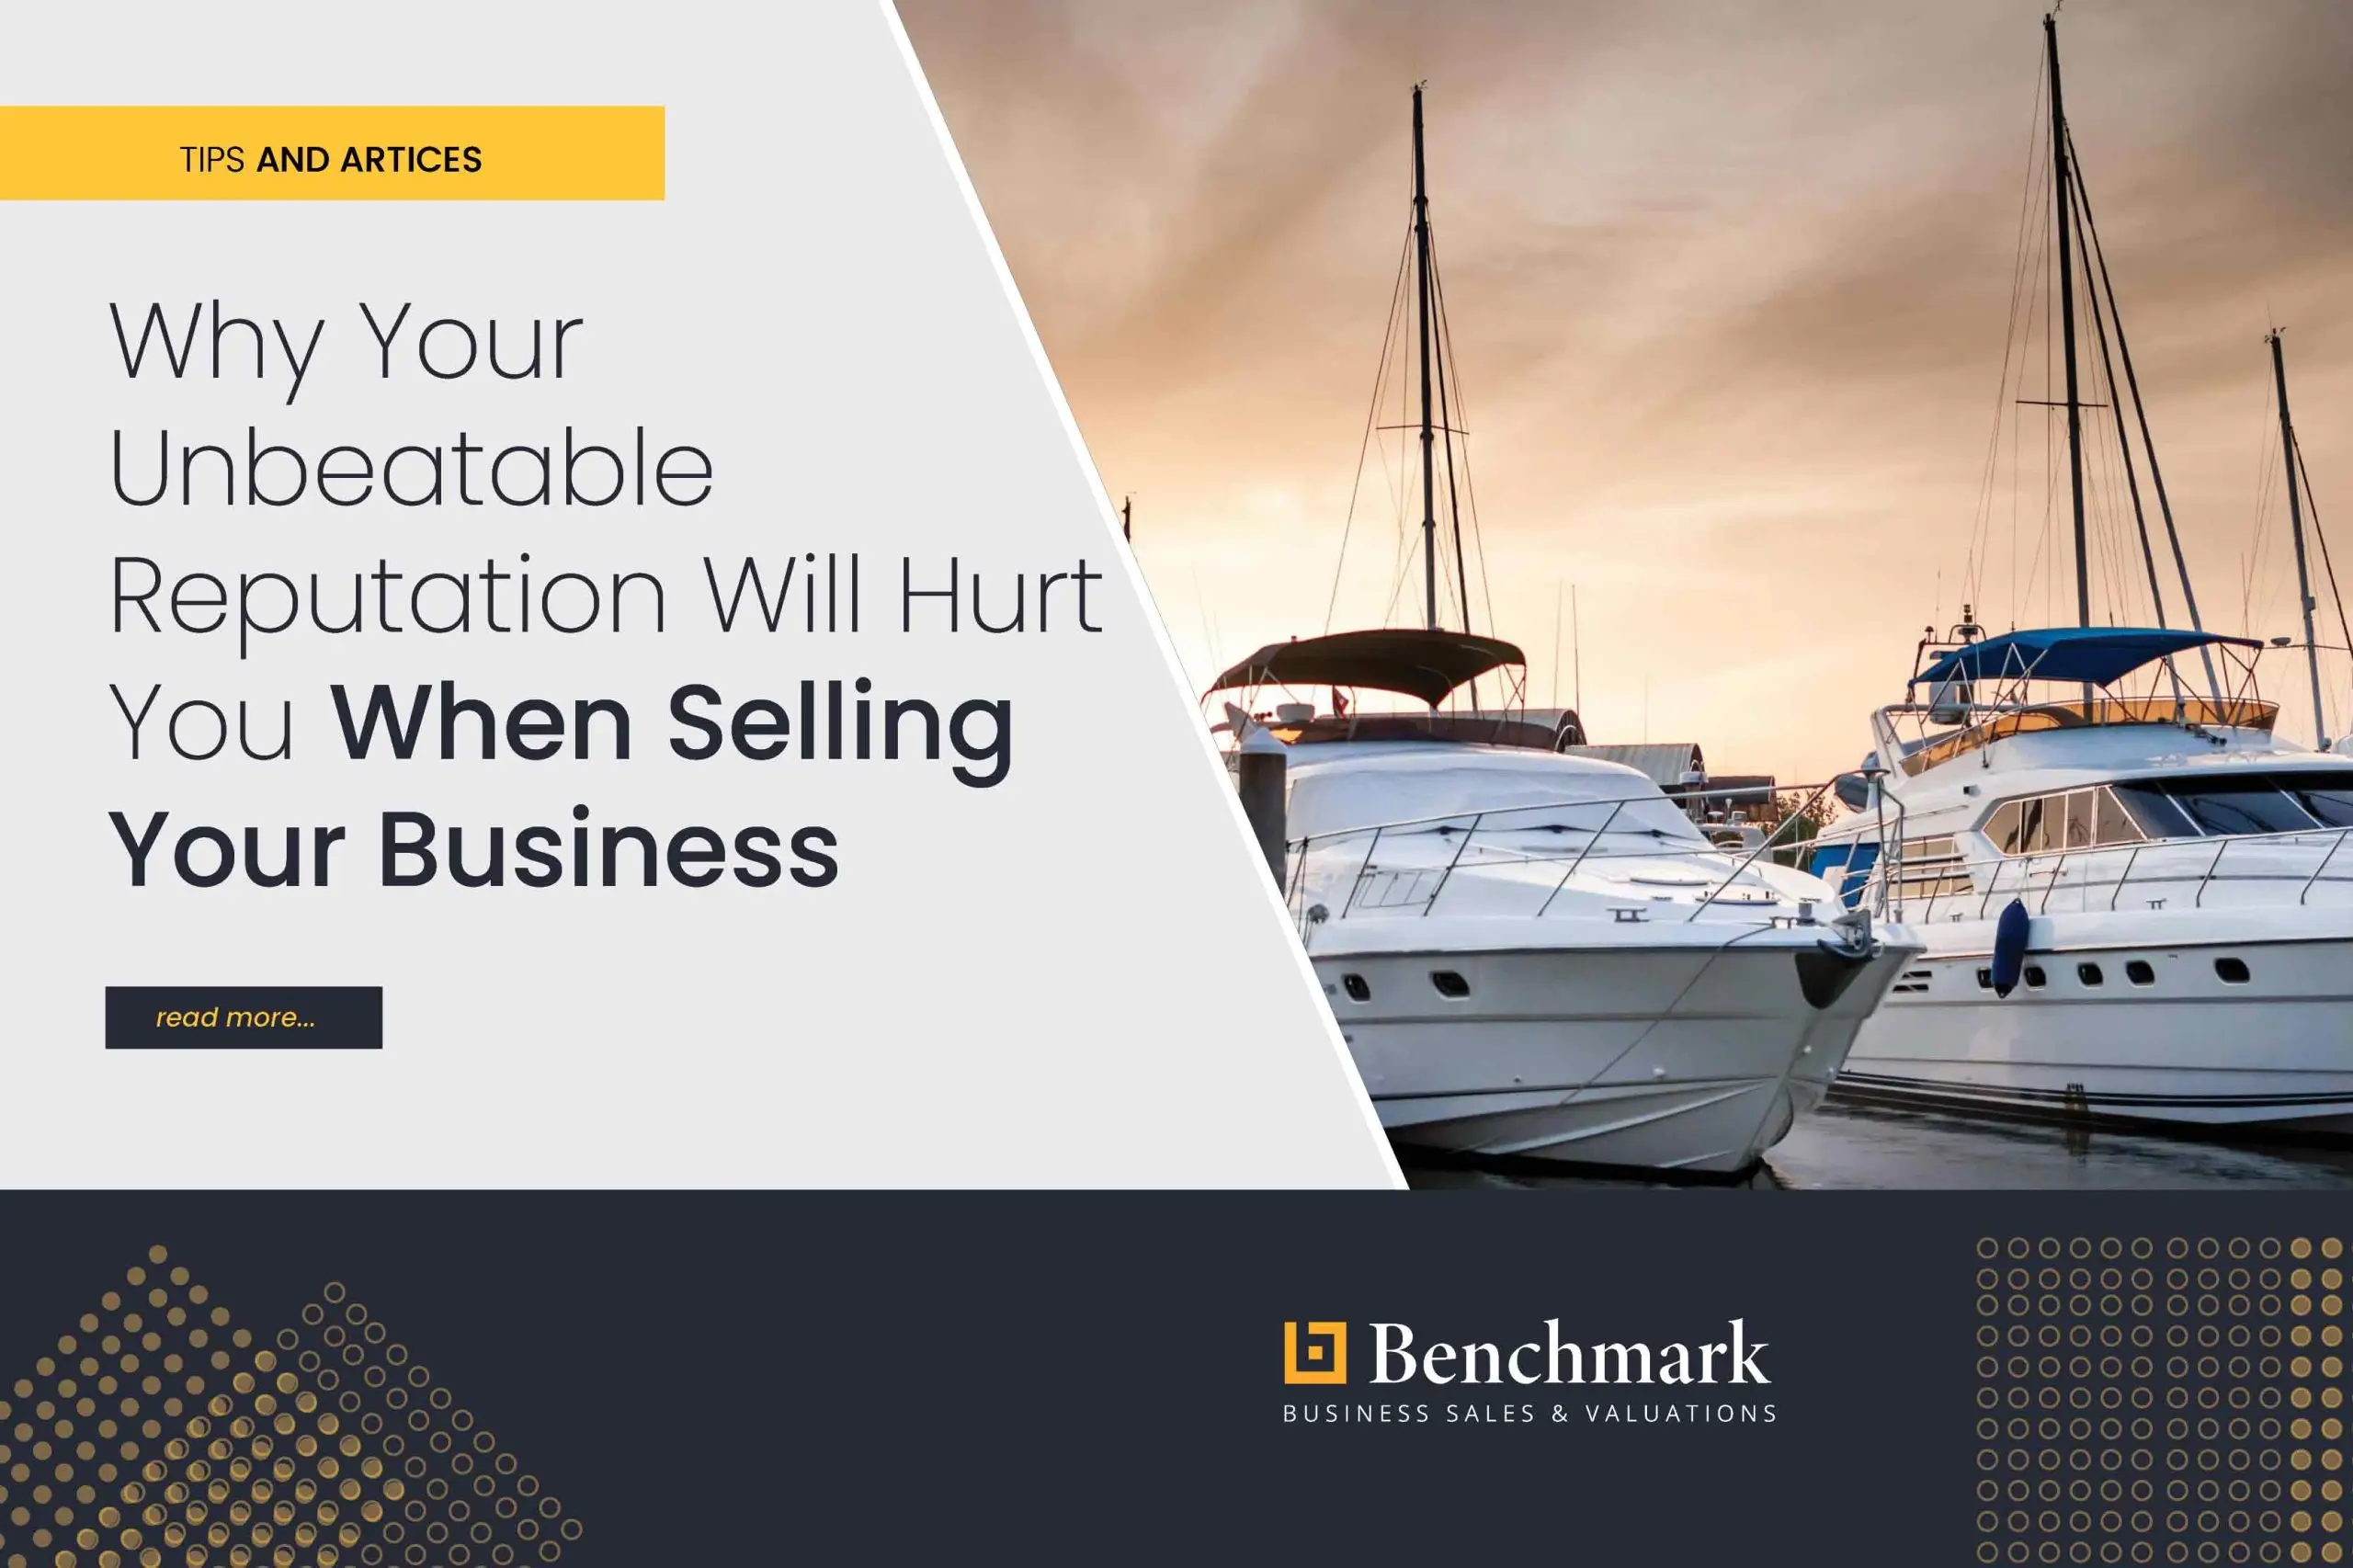 Why your unbeatable reputation will hurt you when selling your business